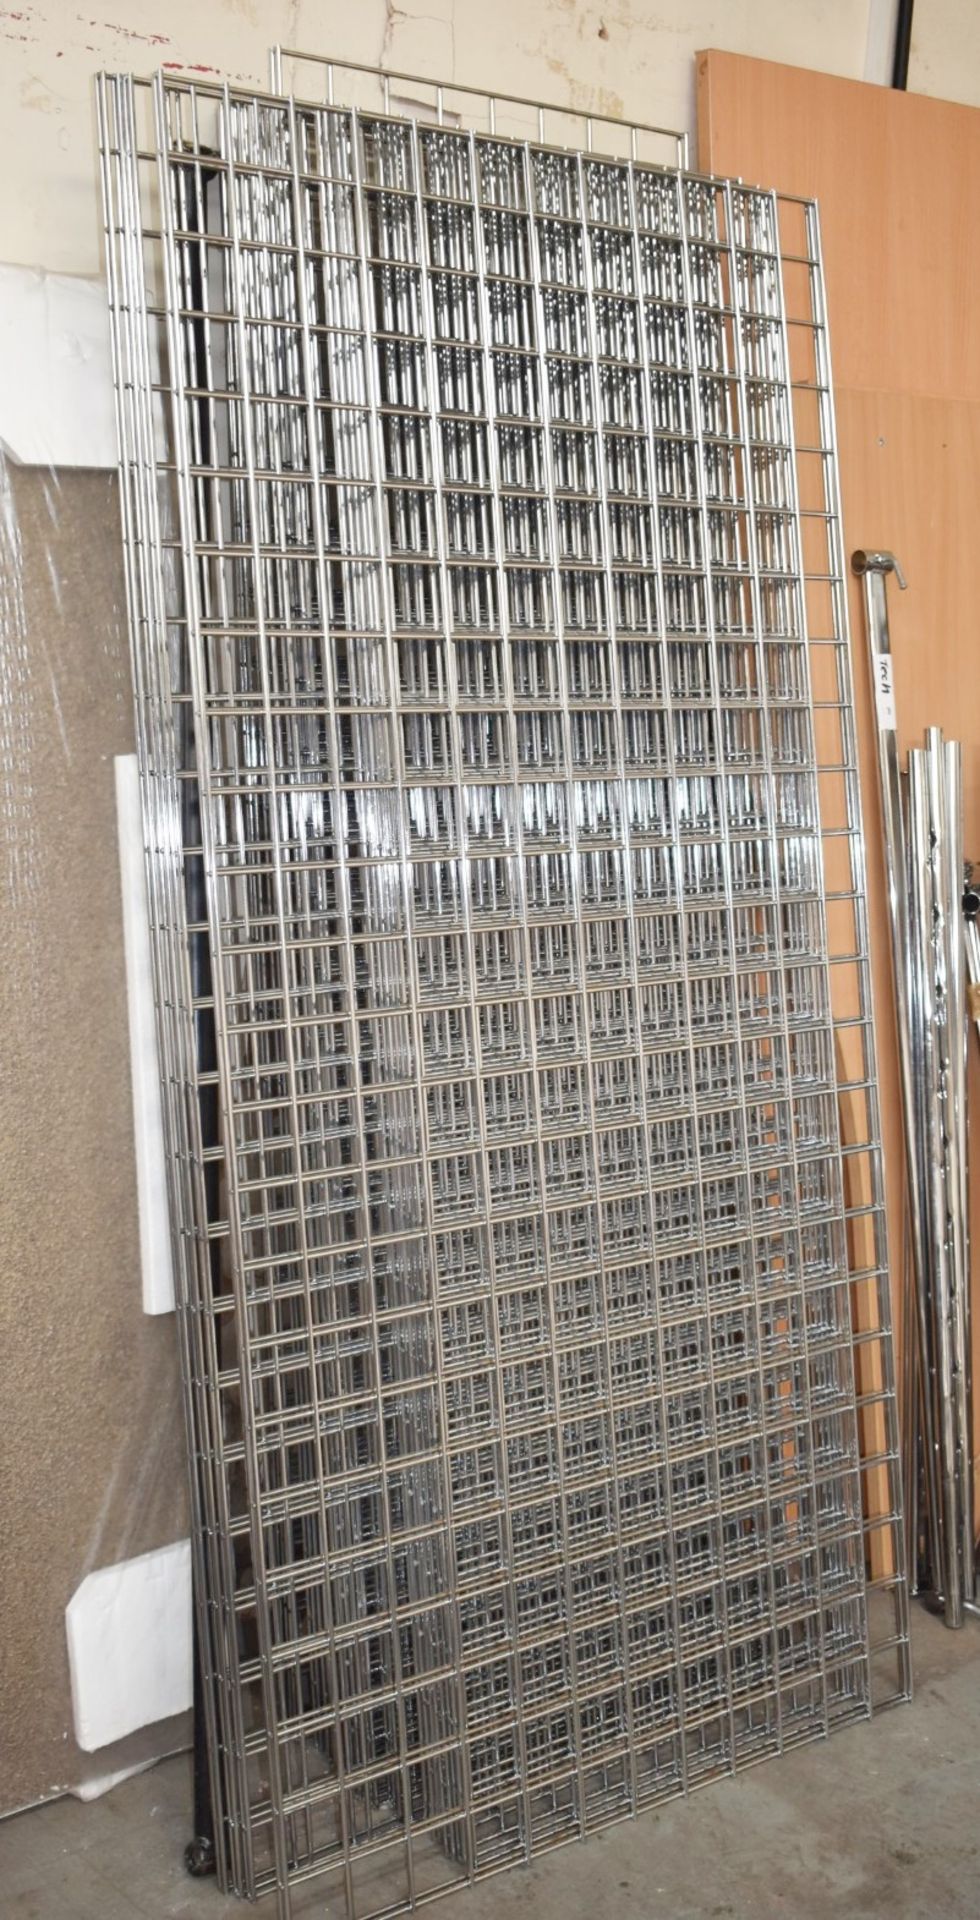 6 x Gridwall Mesh Wall Panels - Heavy Metal Construction With Chrome - Ideal For Creating Pet Cages!